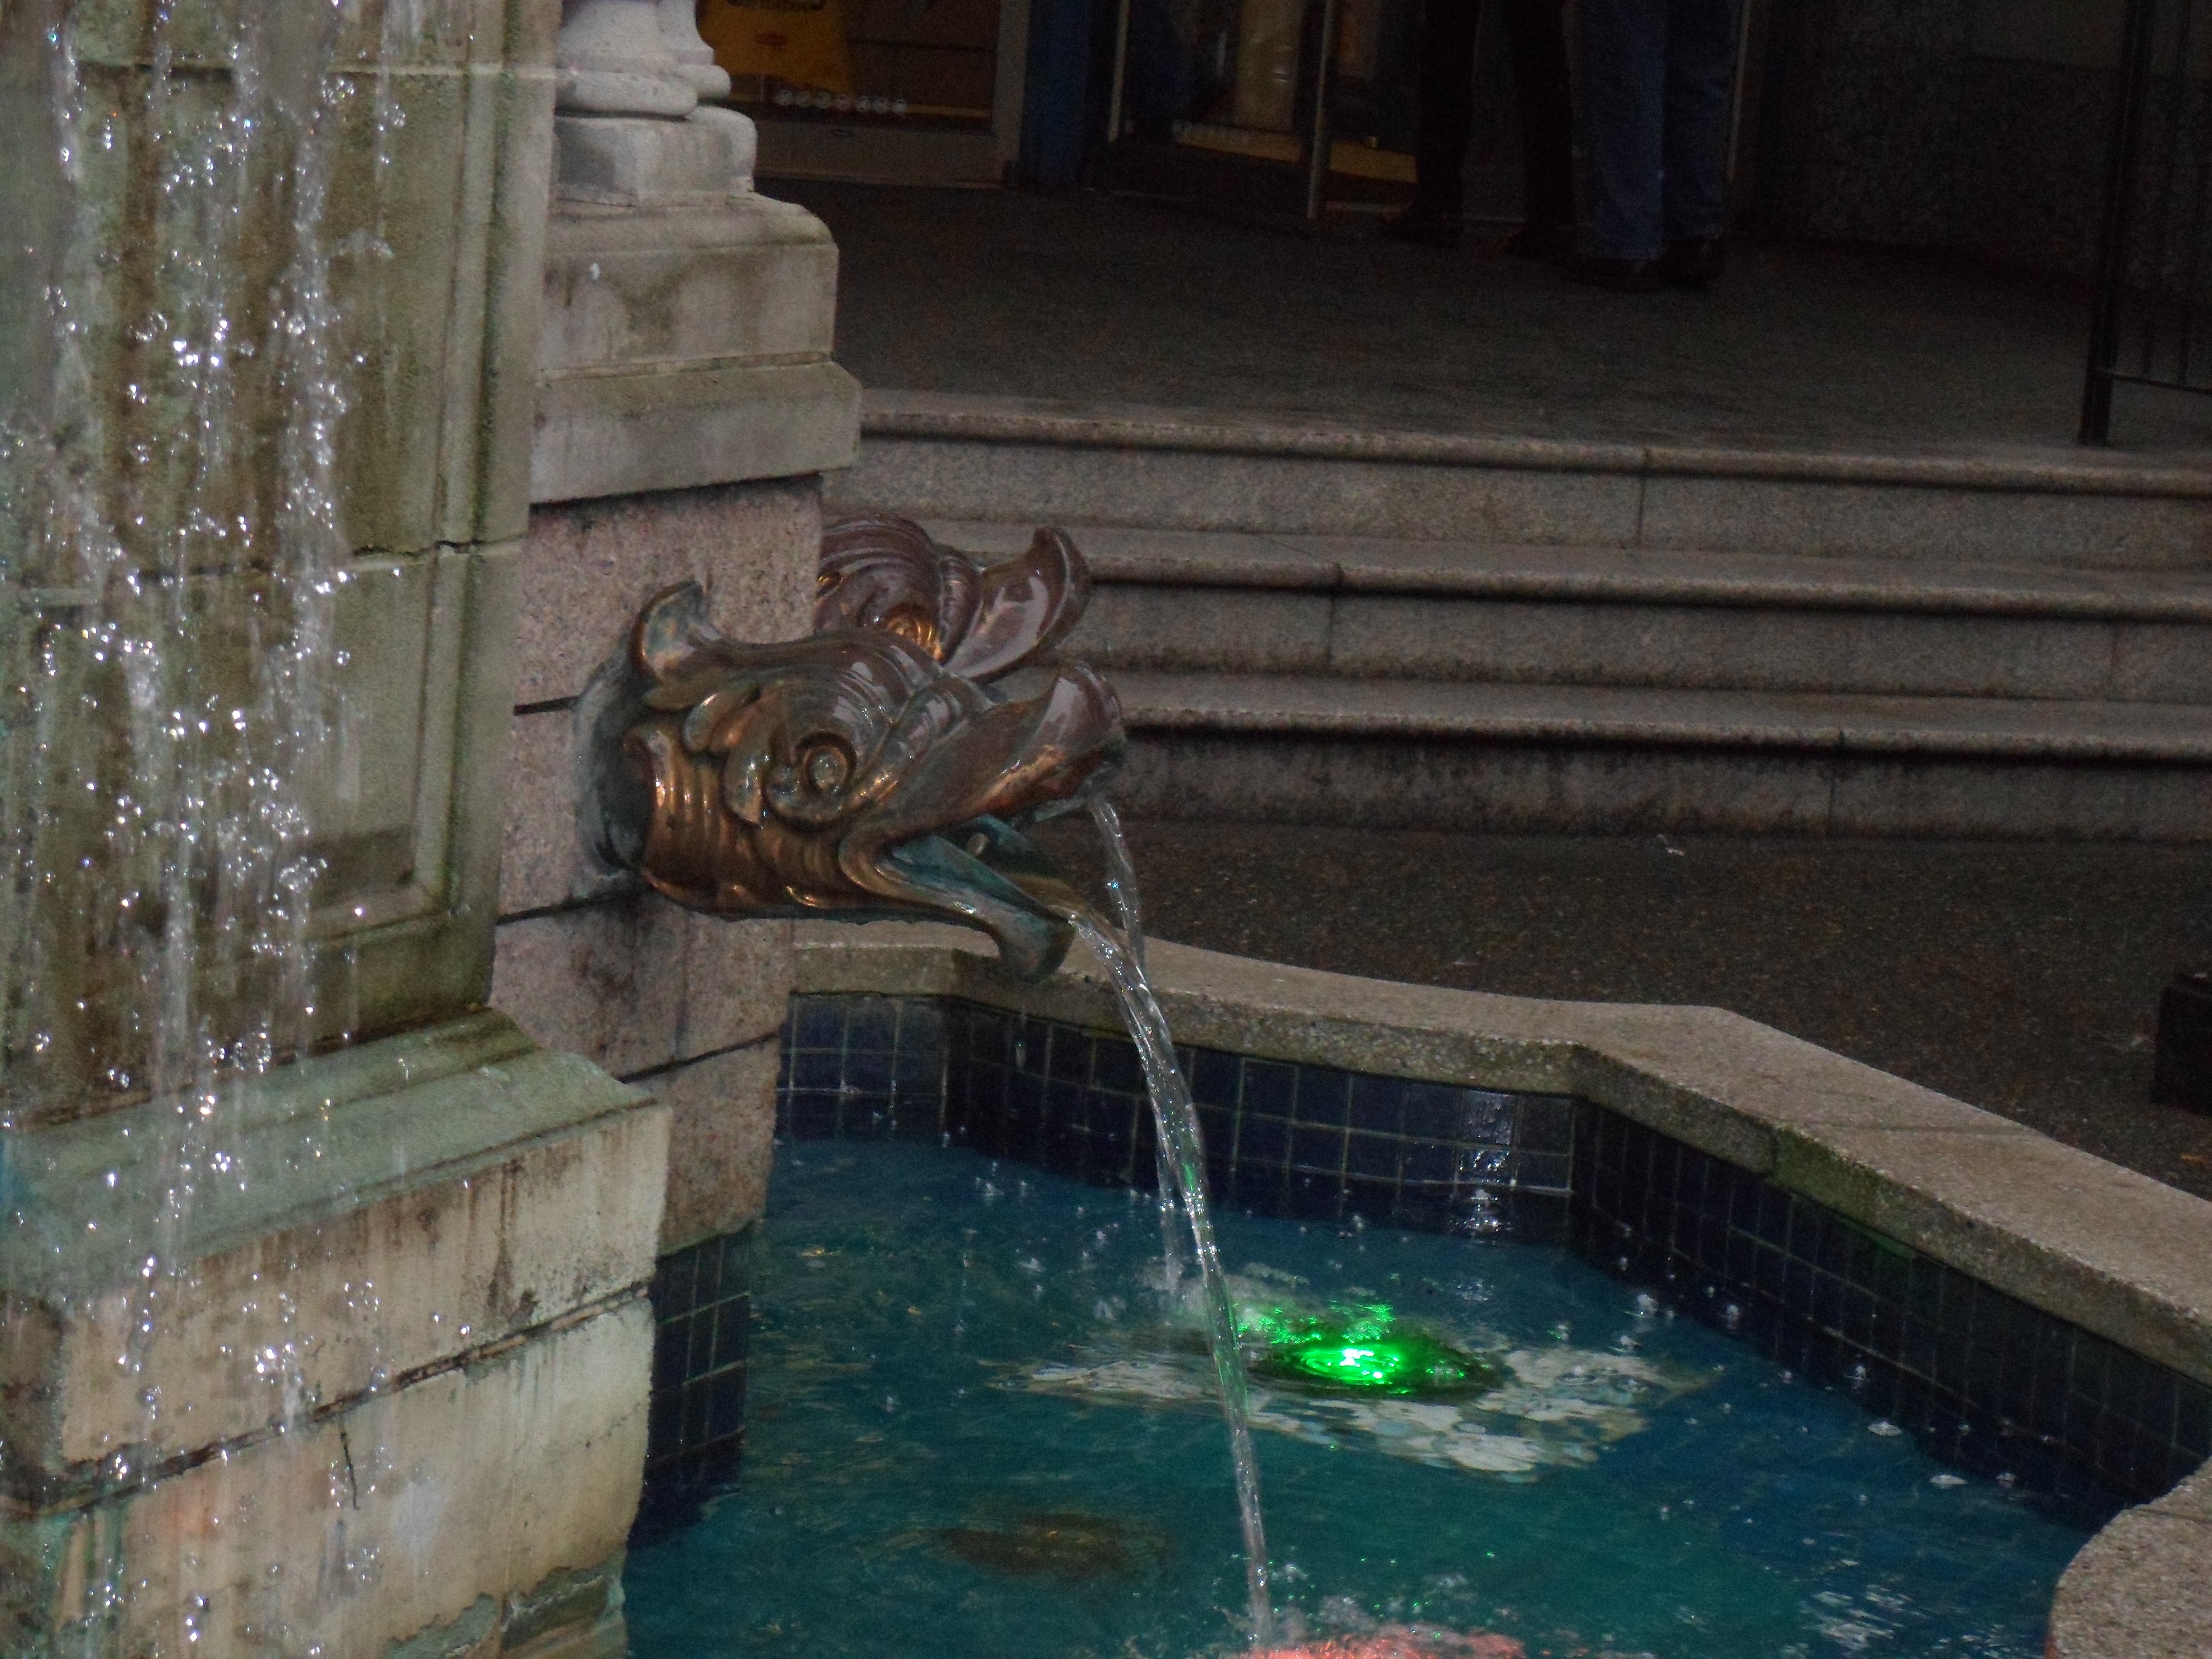 A stone fountain with copper spouts in the forms of fish-heads